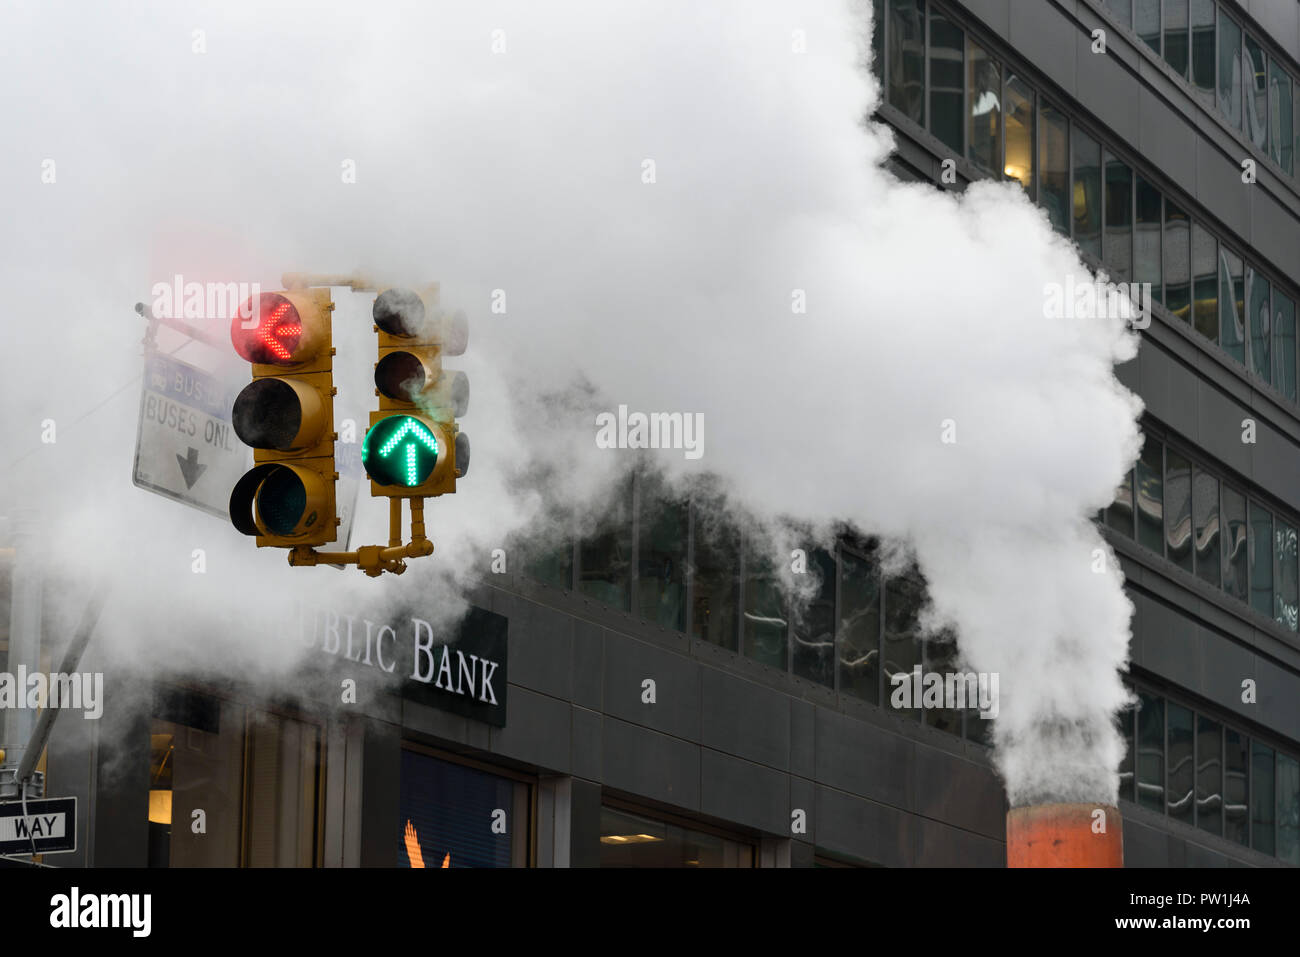 10-2018 Manhattan, New York. Steam escaping from a cooling vent and obscuring traffic lights. Photo: © Simon Grosset Stock Photo